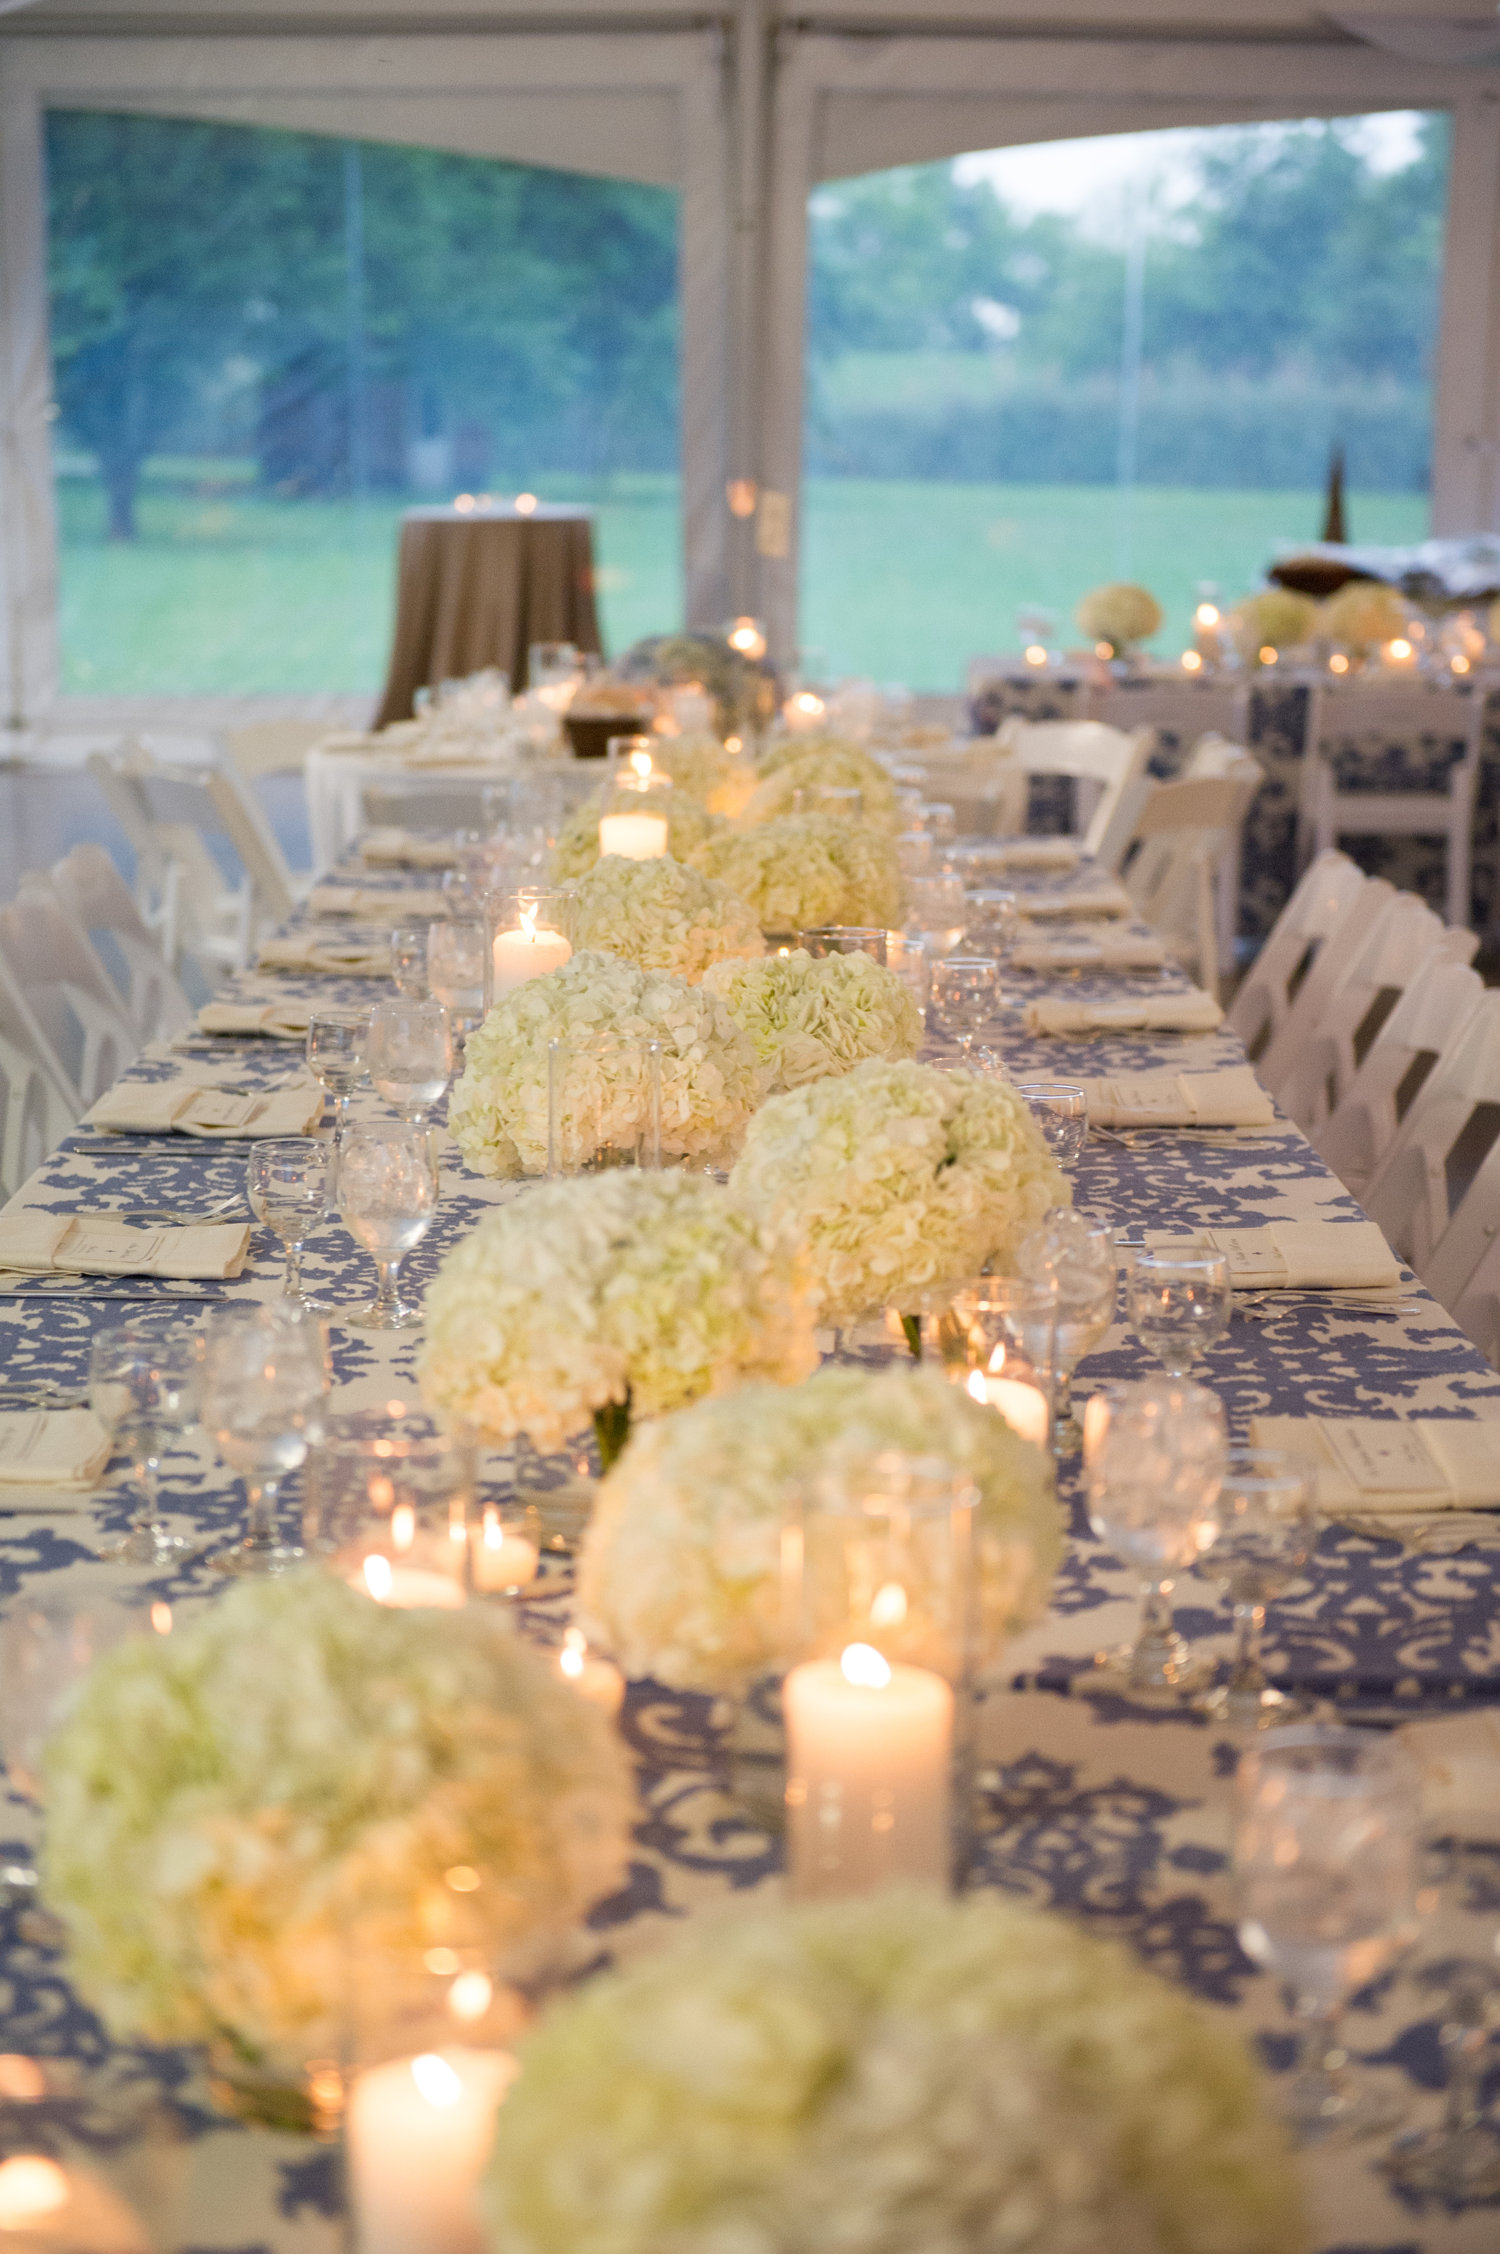 White and blue table linens with white hydrangeas lining the table with tea lights and candles